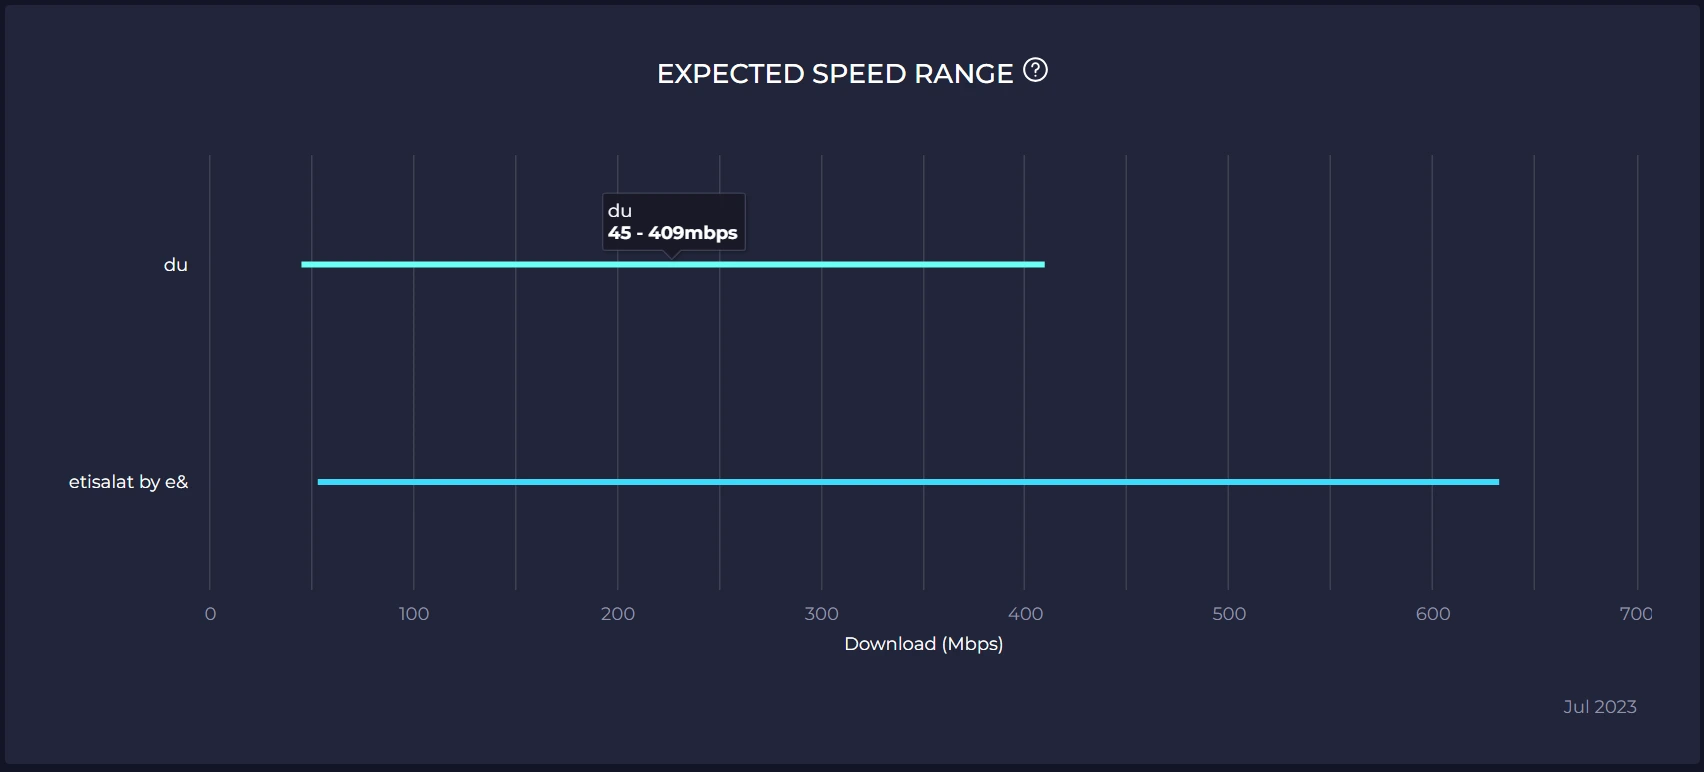 The Result of Speed Test DU in Sharjah is 45-409 mbps